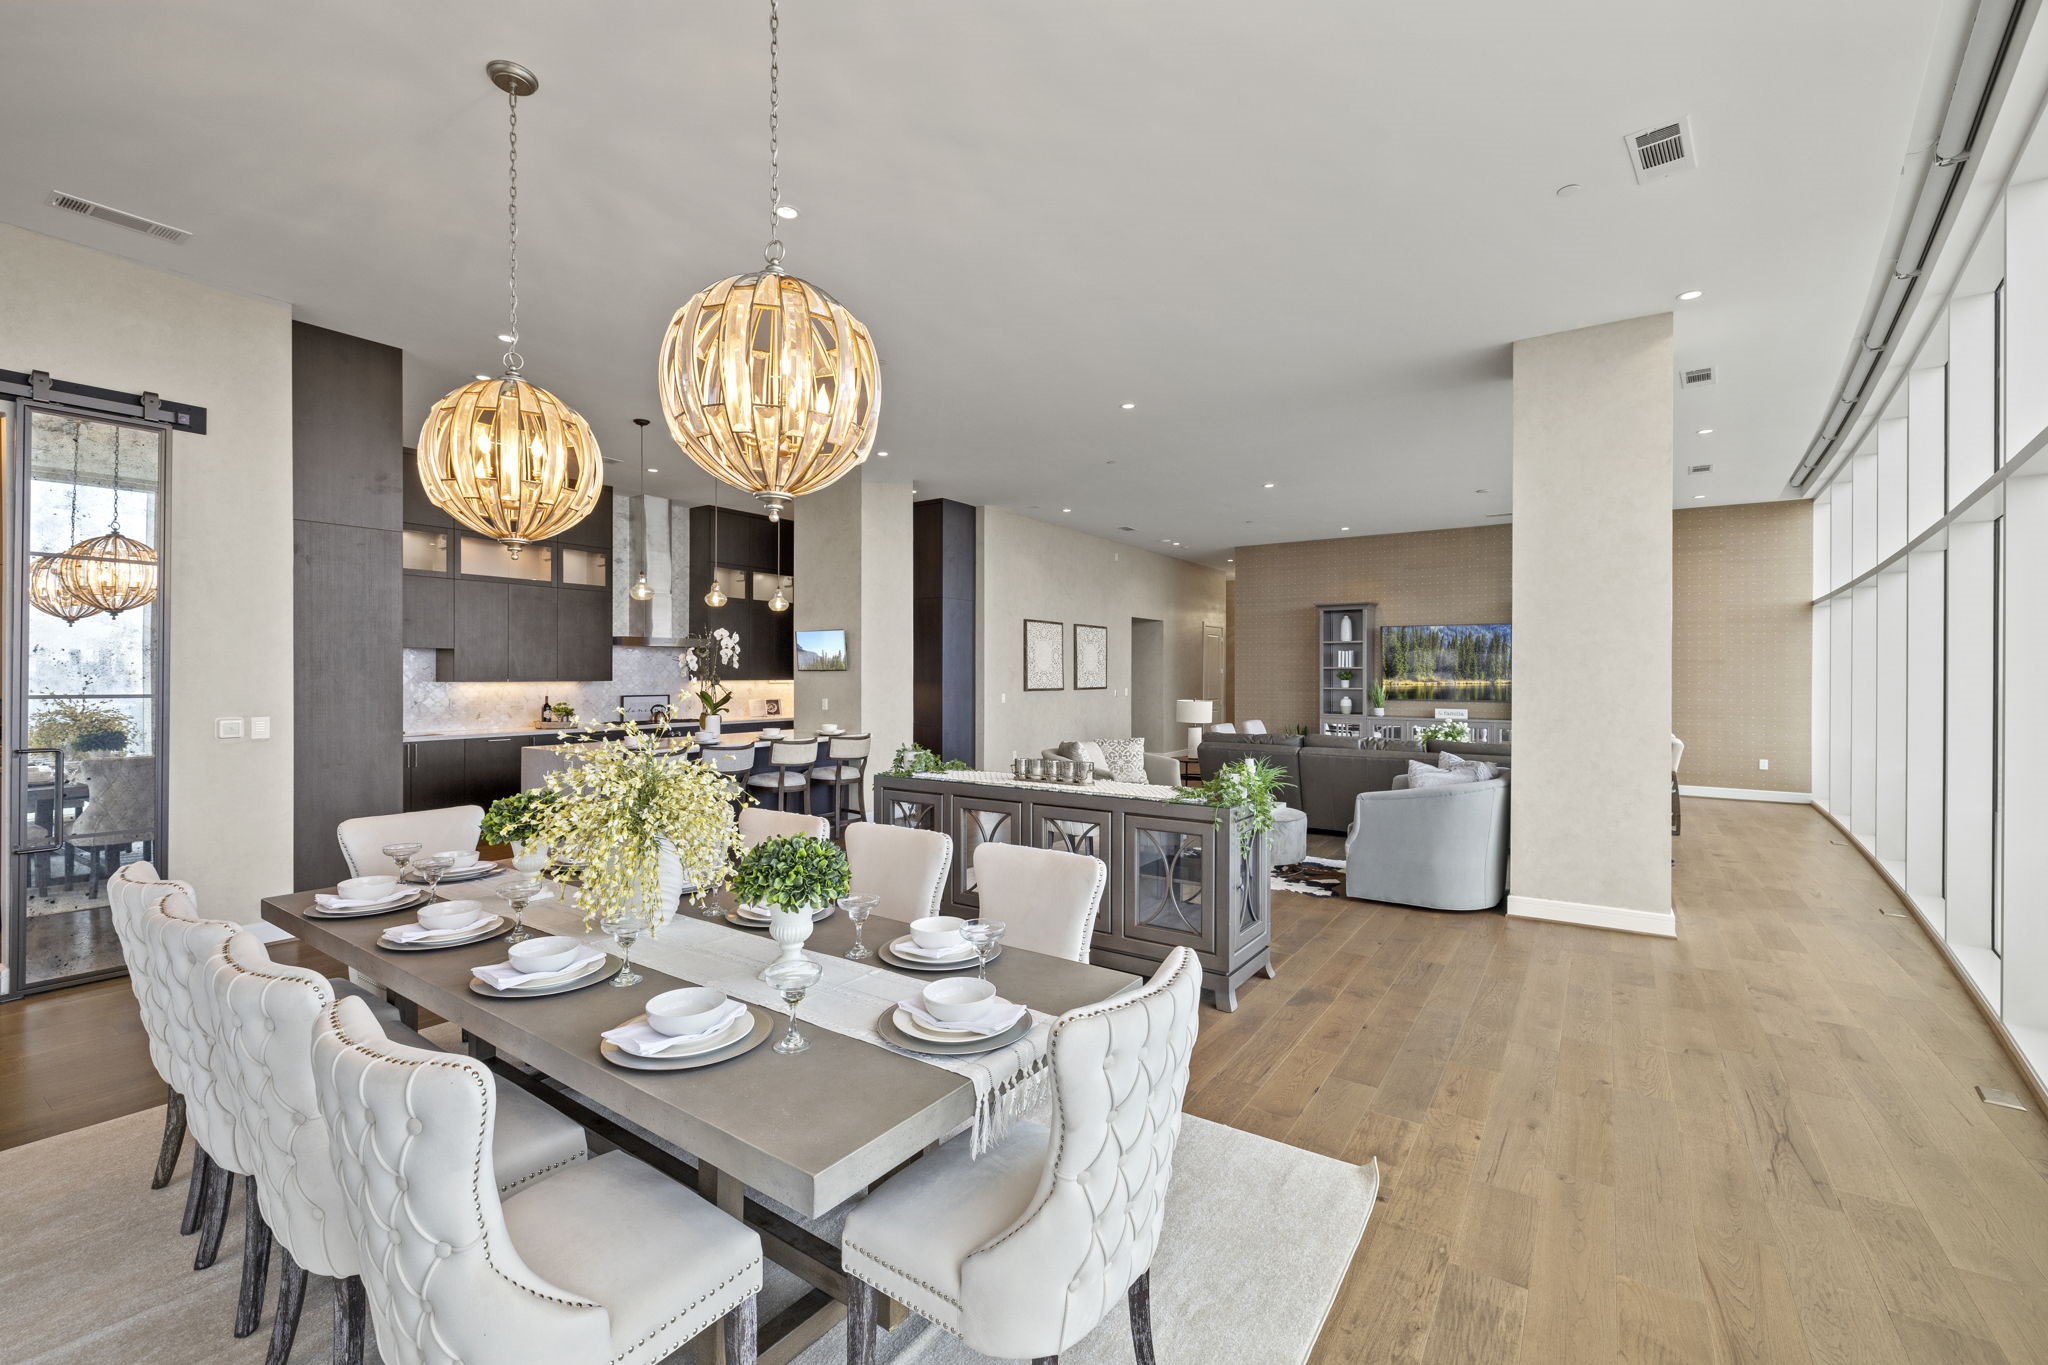 The dining area dazzles with stunning chandeliers as the focal point.